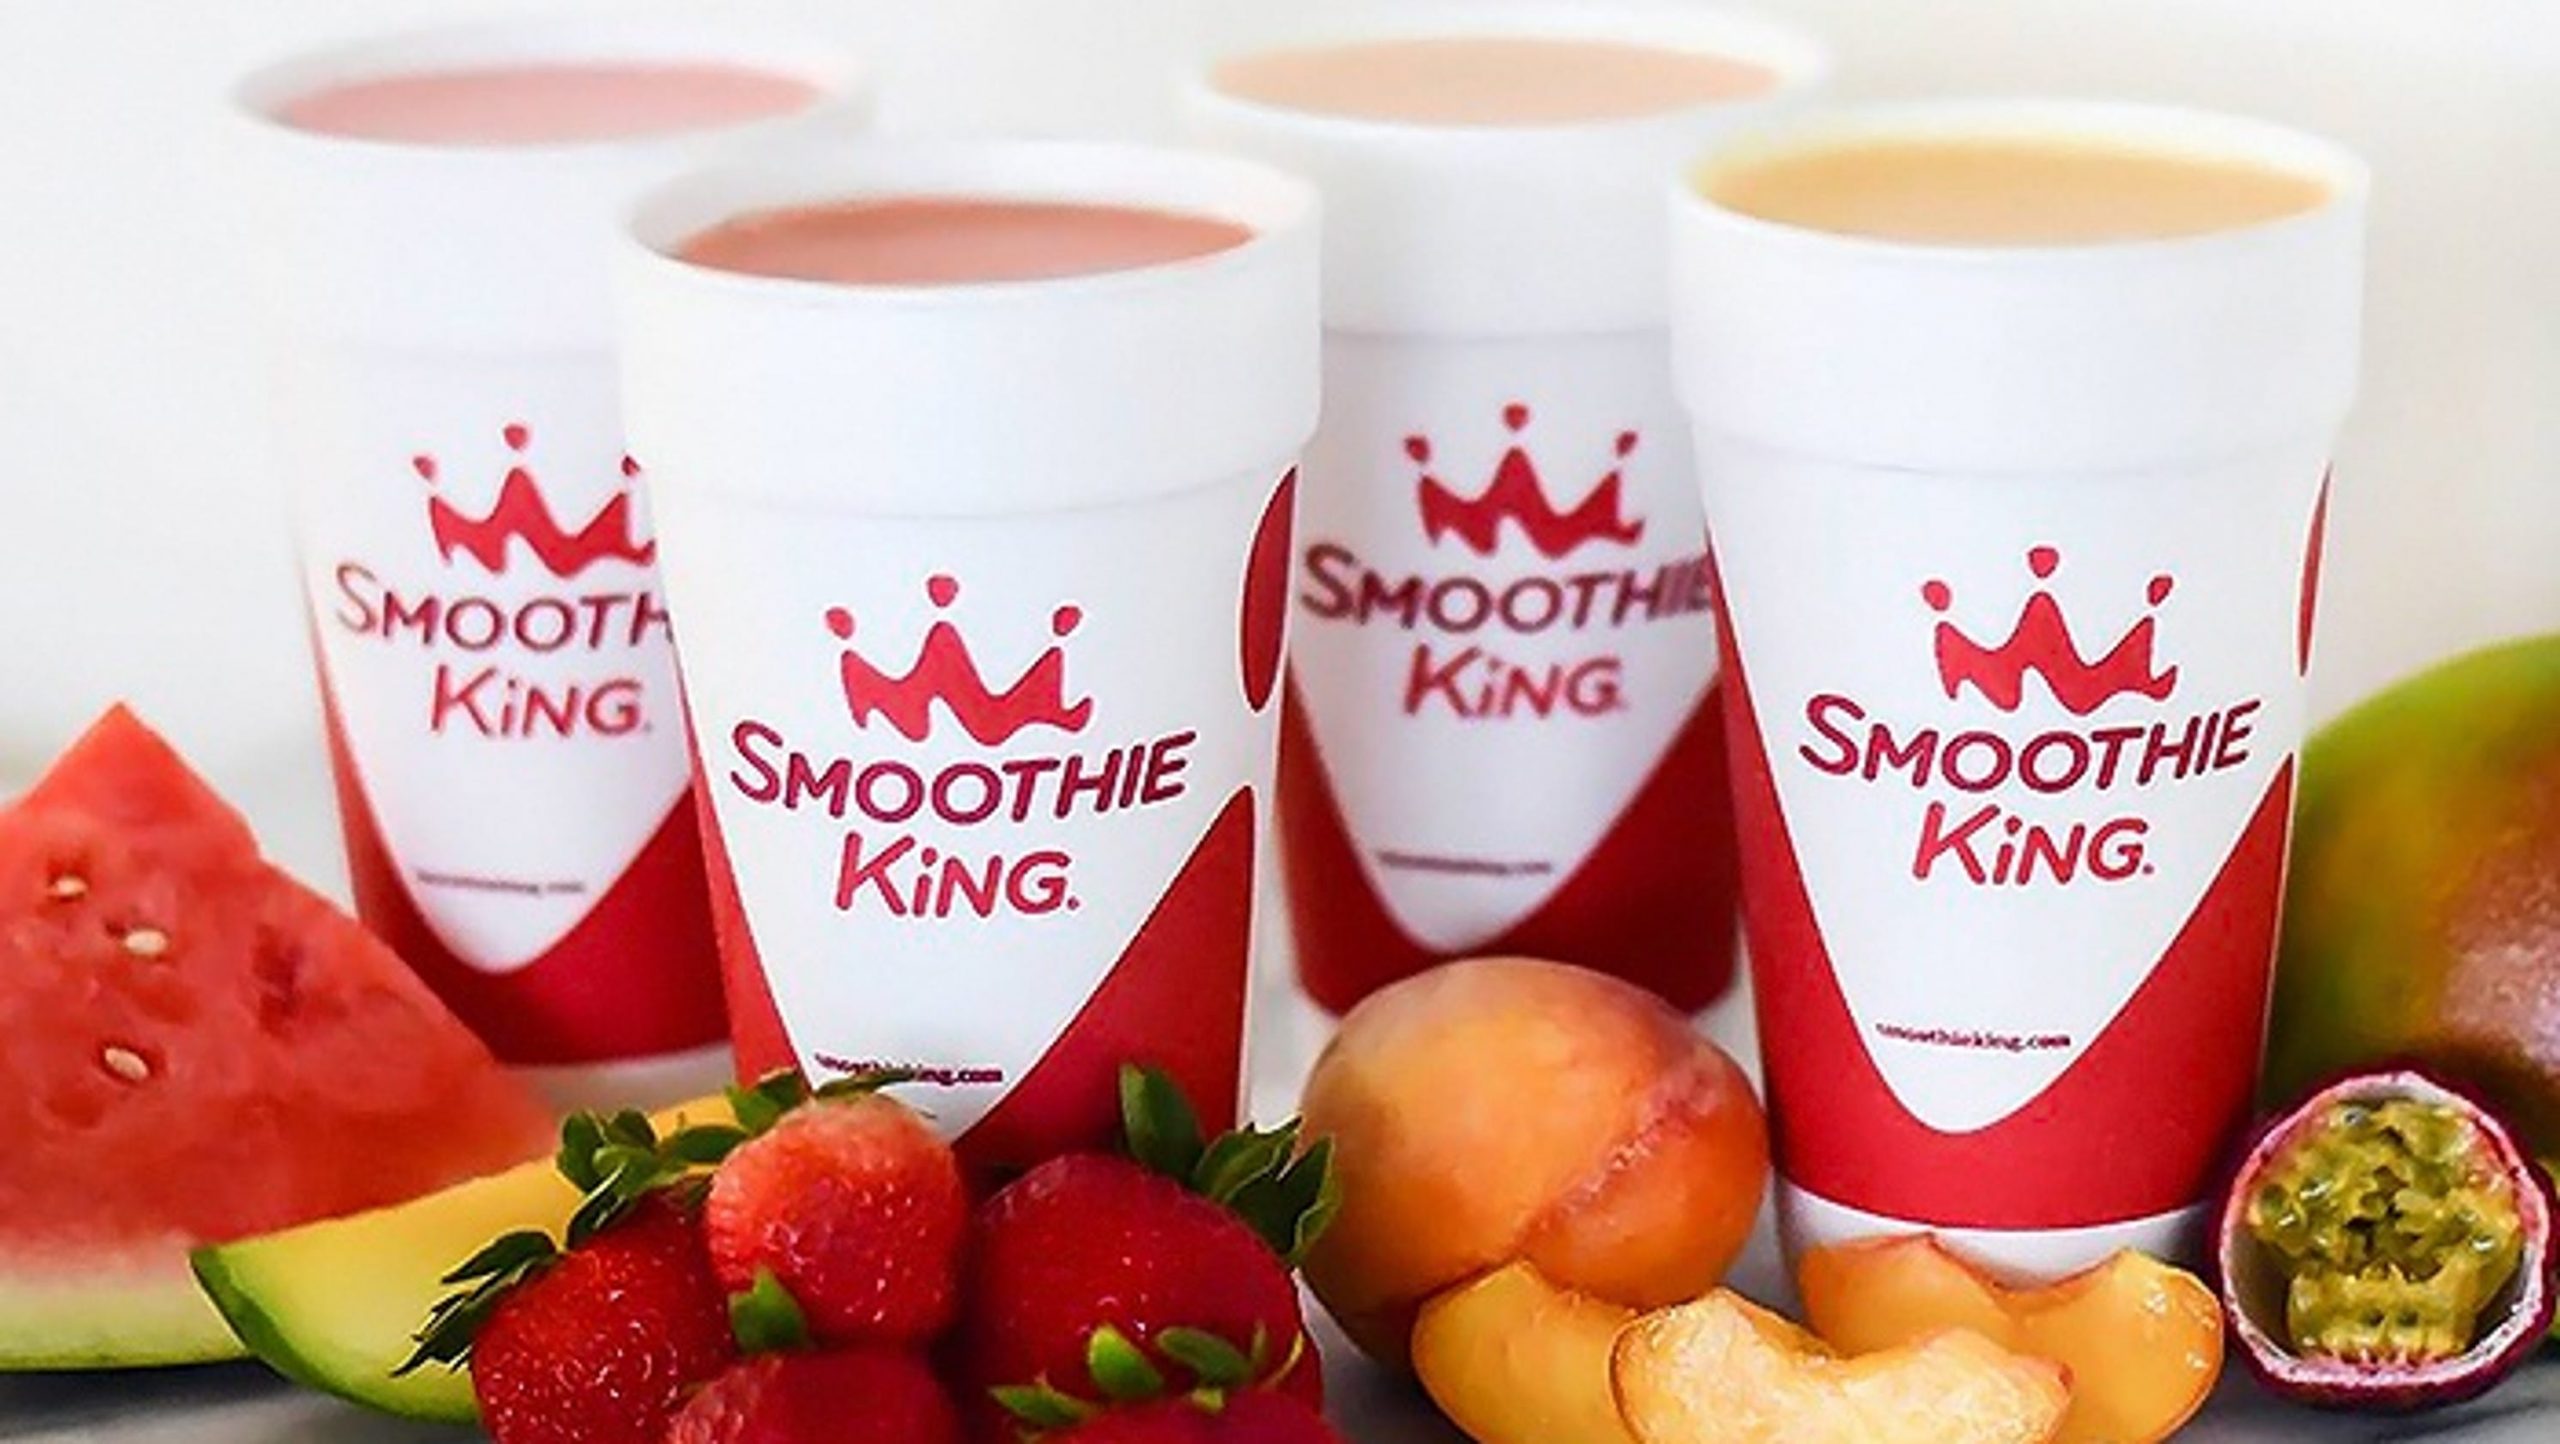 Smoothie King Smoothies for Less...